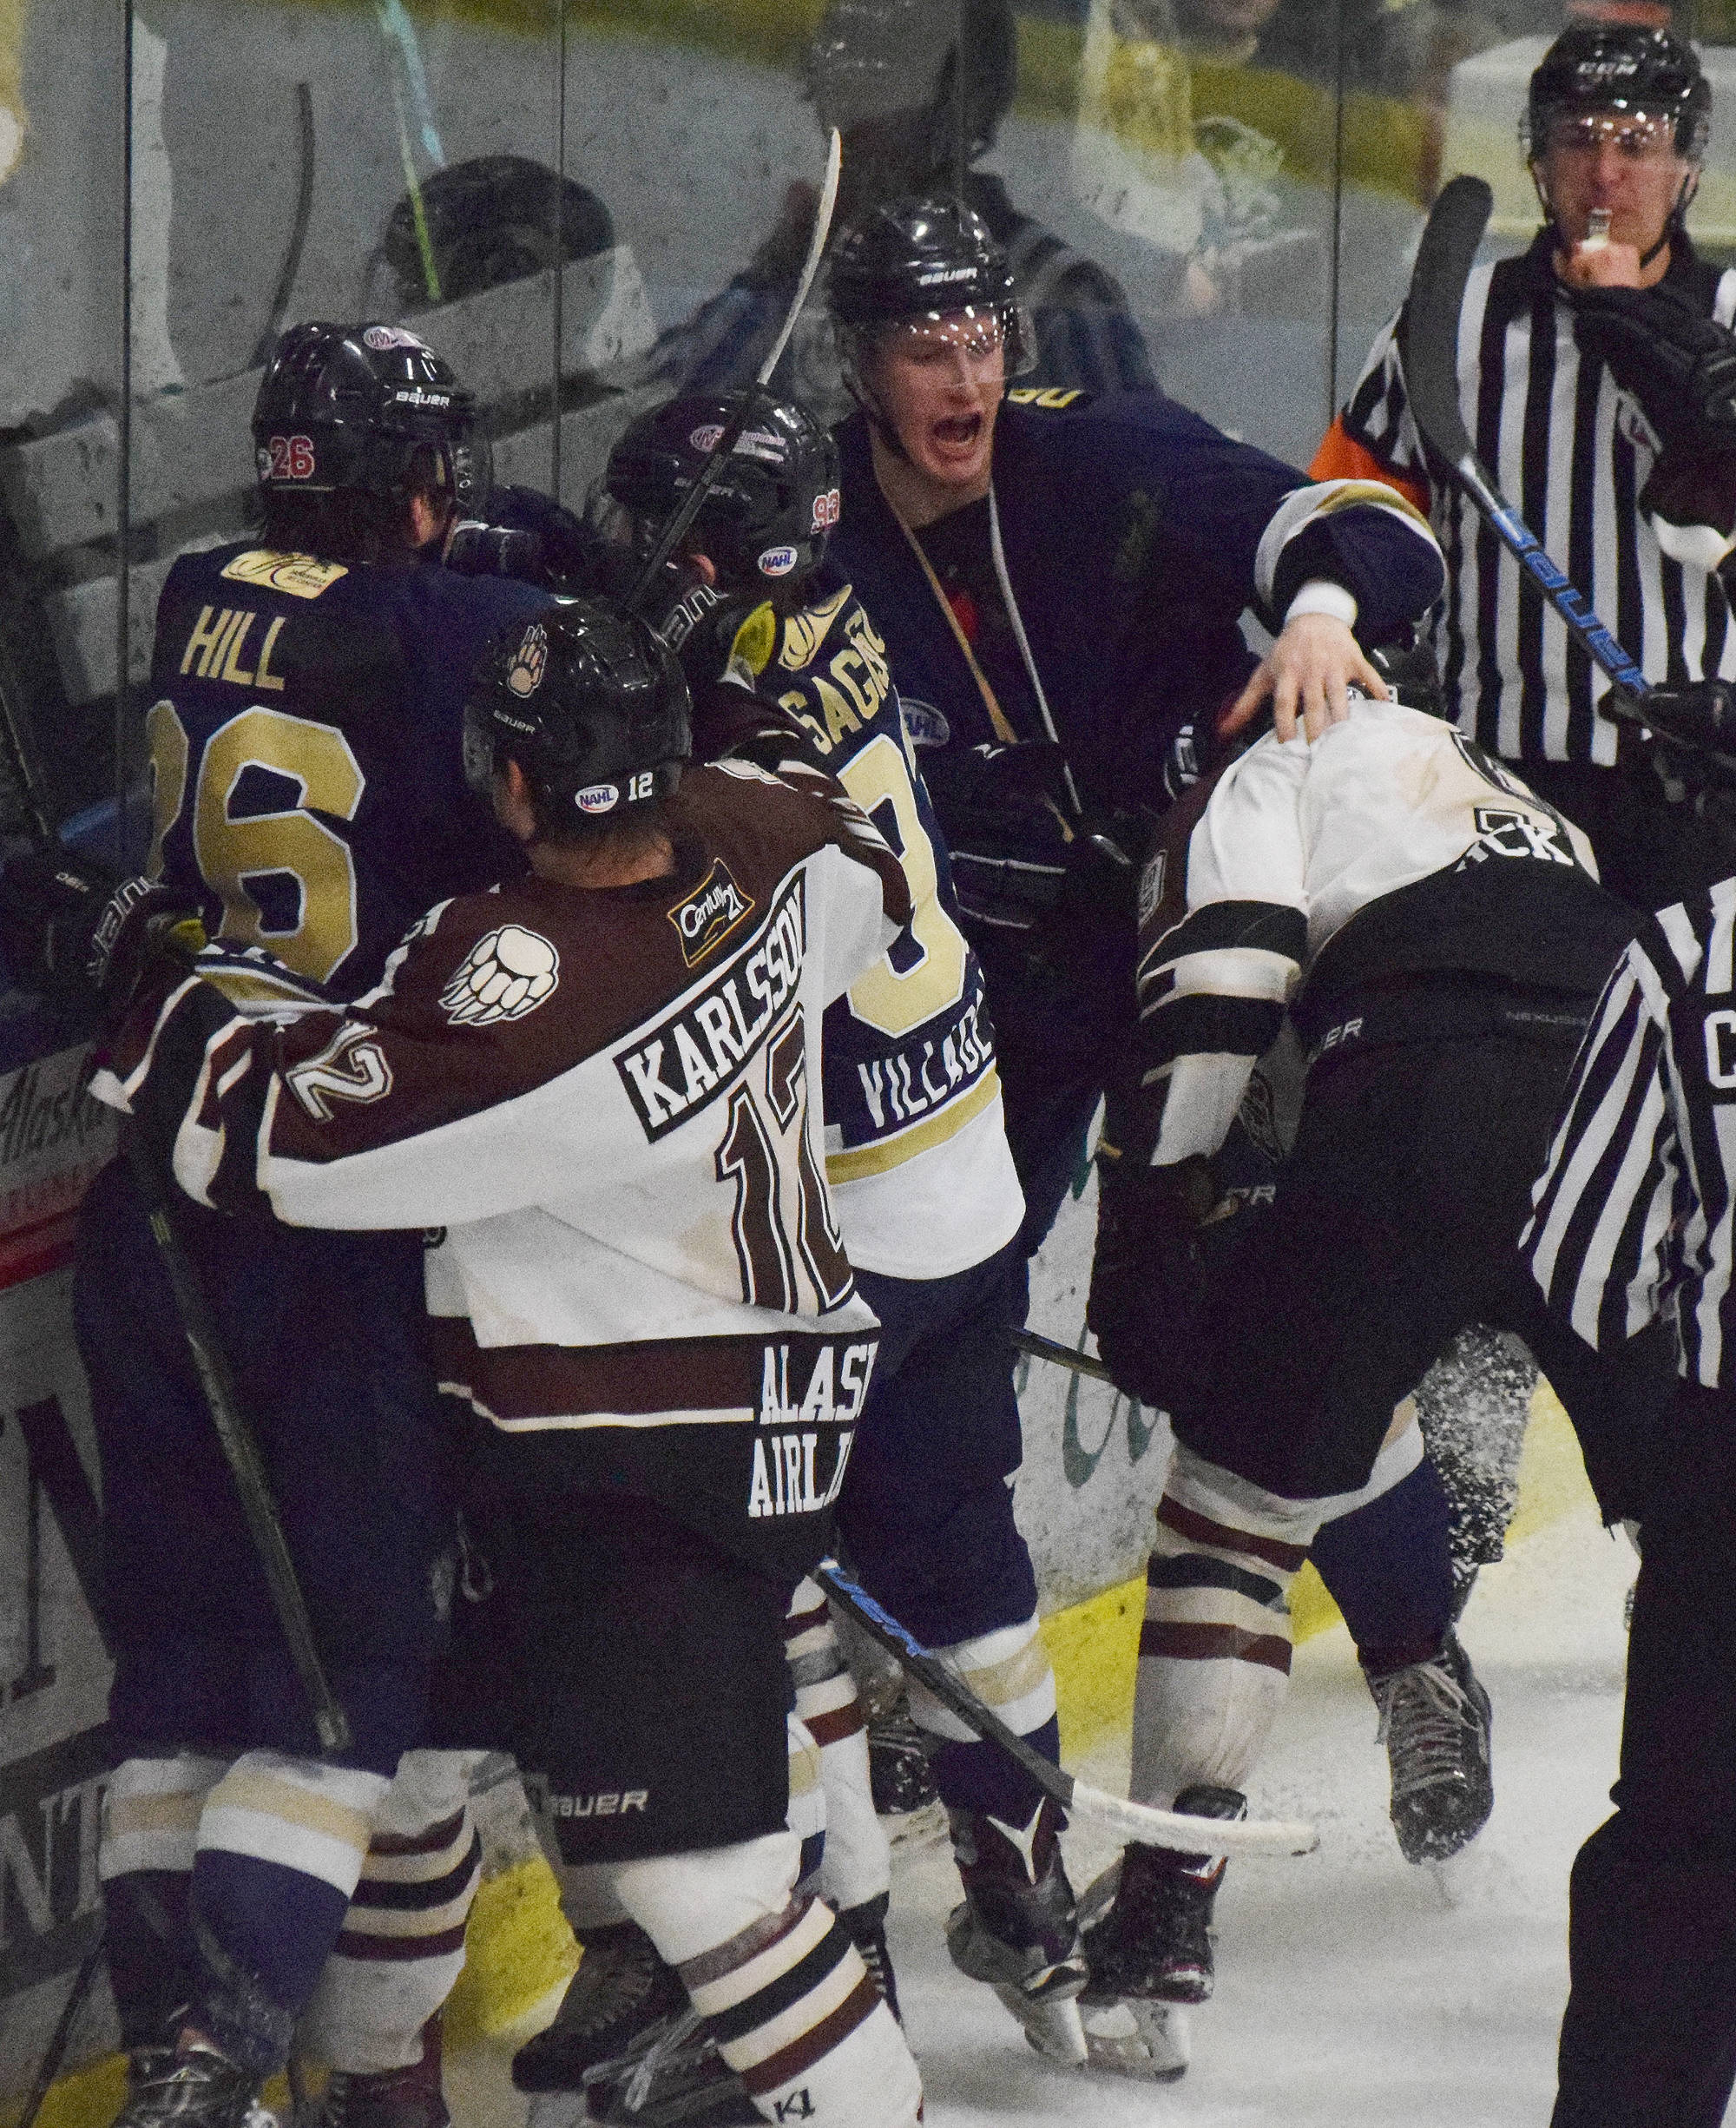 Janesville skater Sean Driscoll (middle) drops the gloves against Kenai River’s Alex Klekotka (right) Friday night at the Soldotna Regional Sports Complex. (Photo by Joey Klecka/Peninsula Clarion)